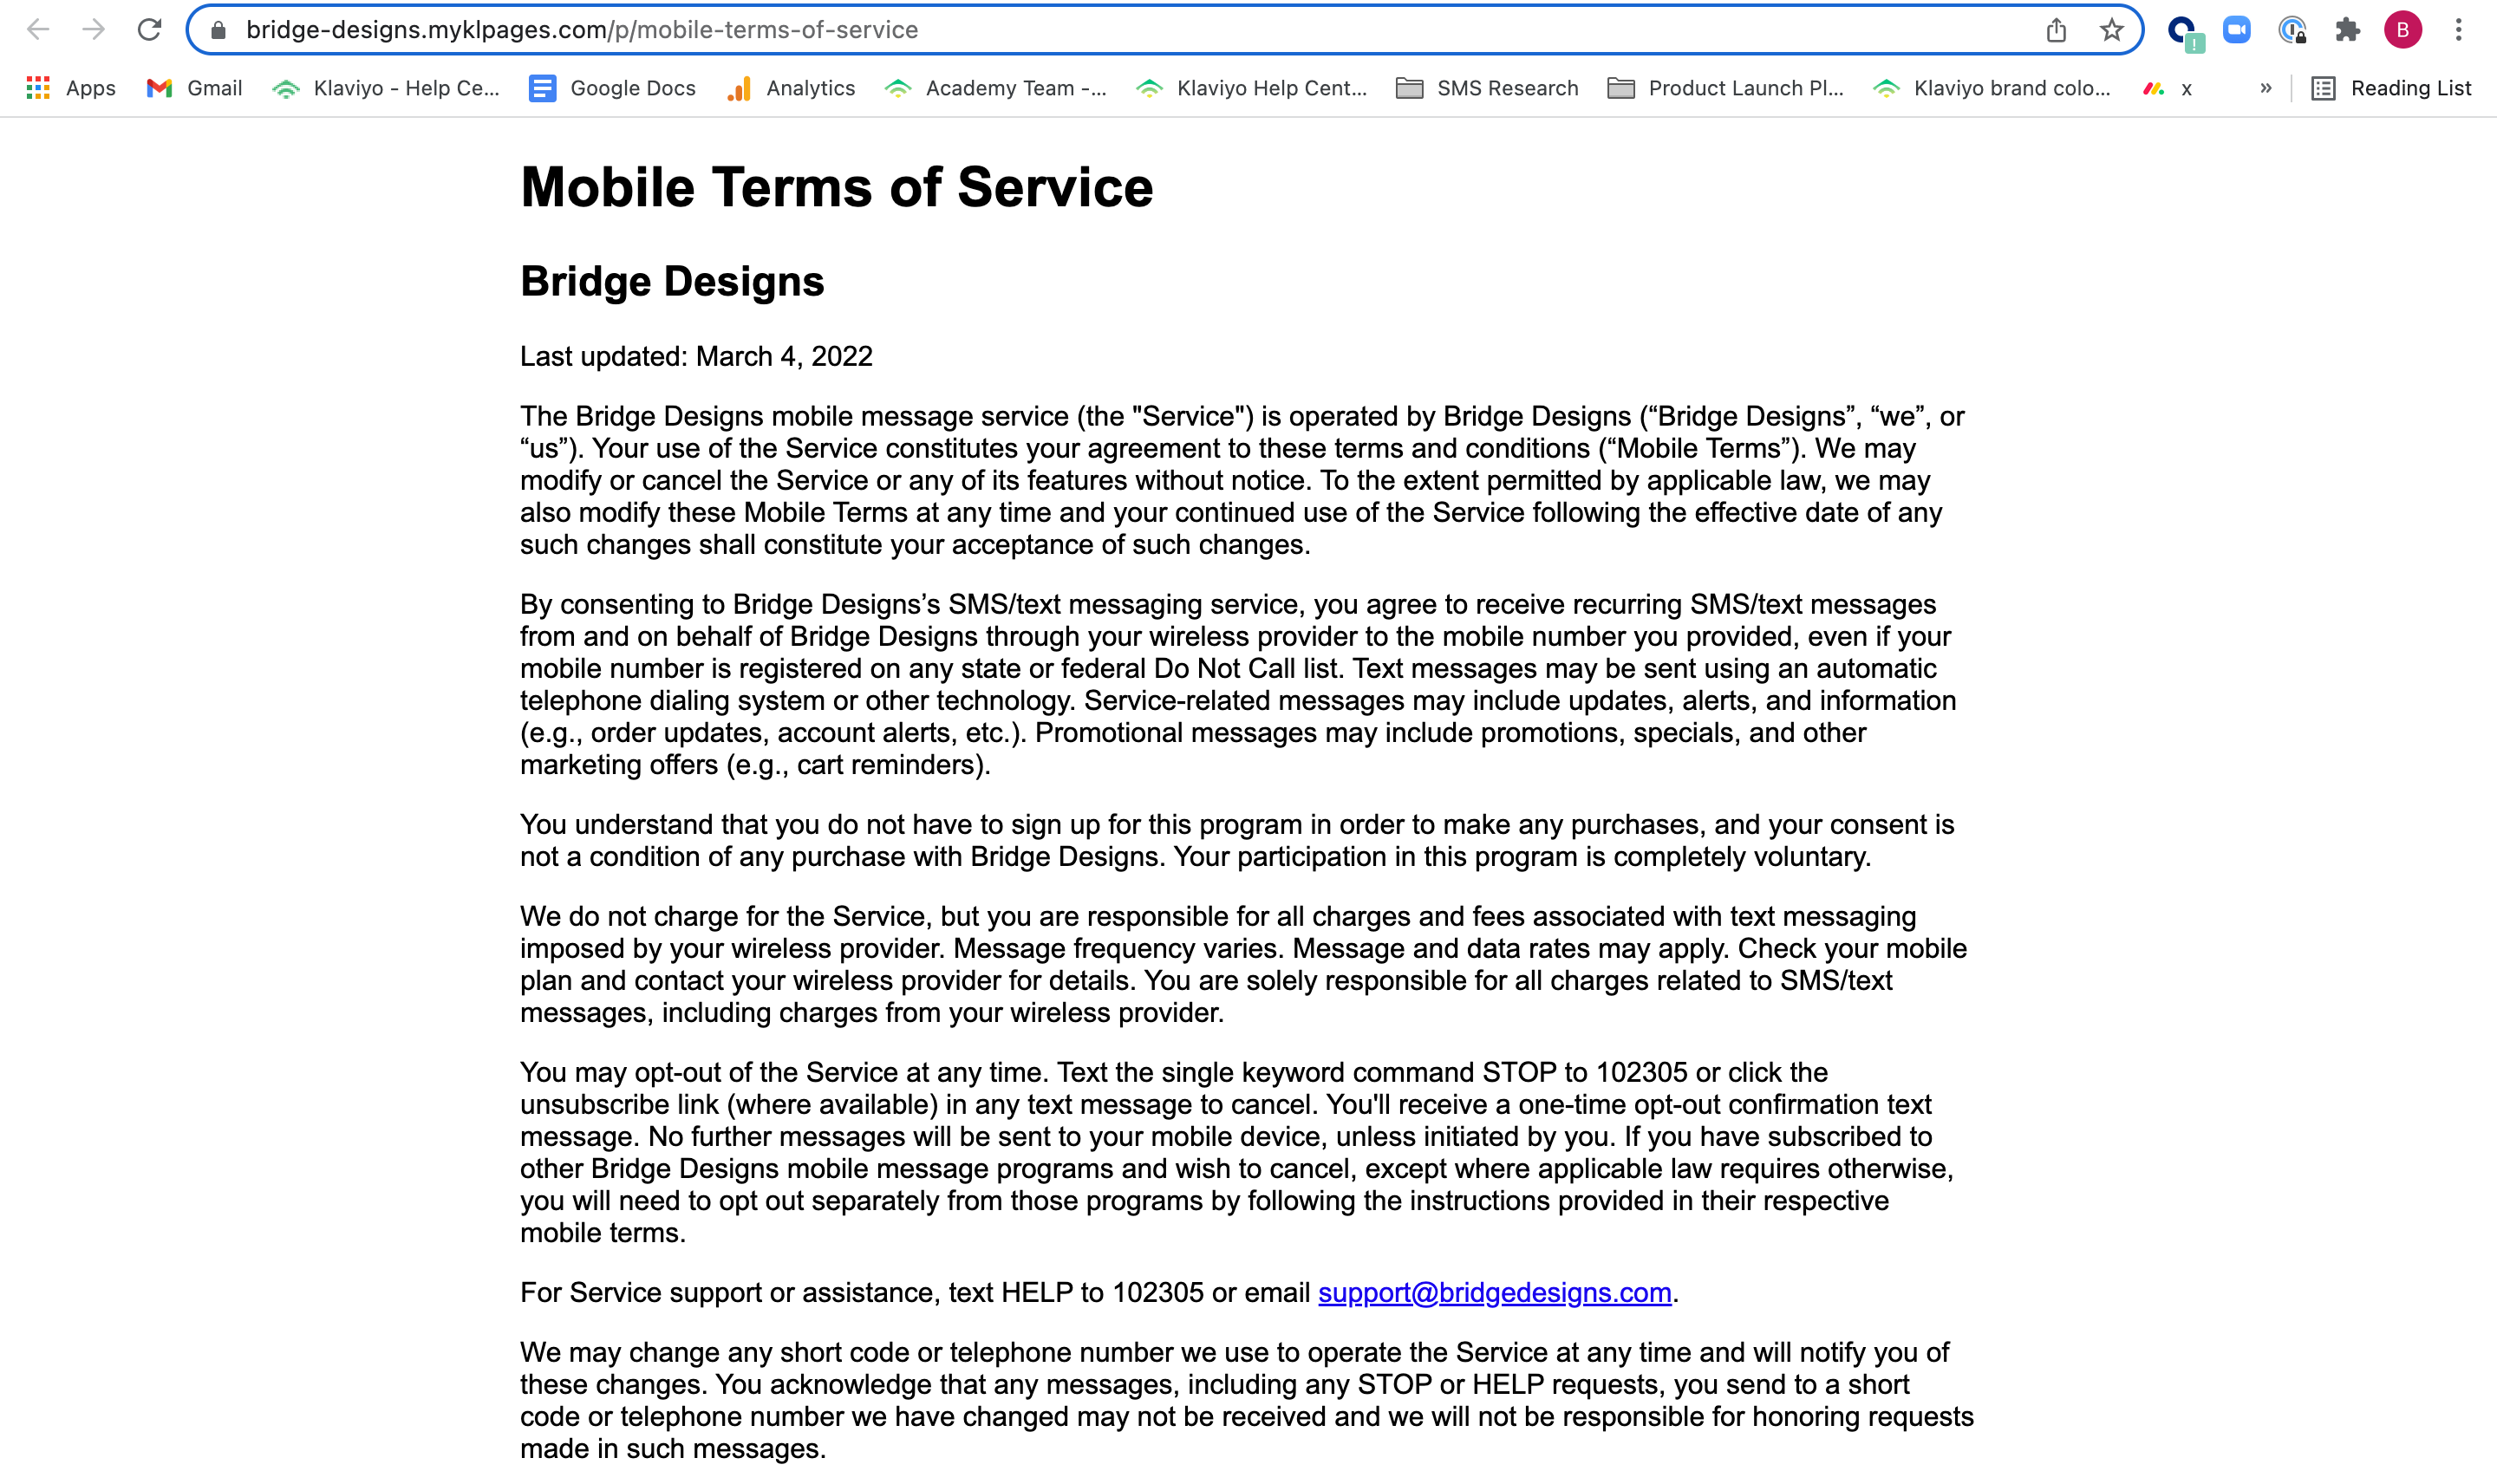 Example of a SMS terms of service page created and hosted in Klaviyo